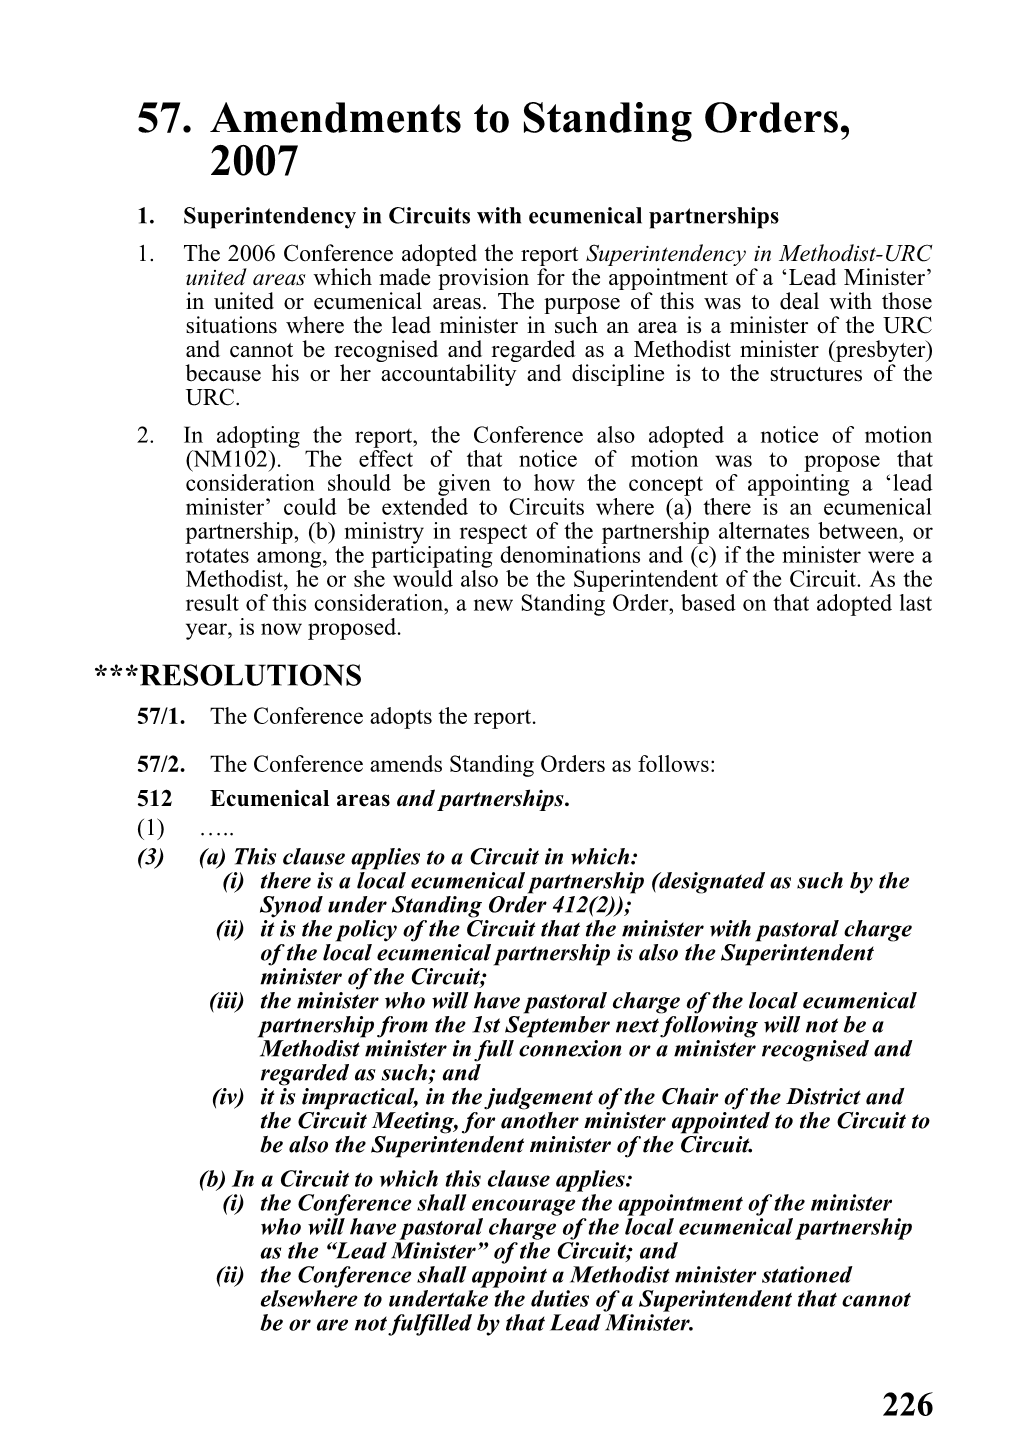 57. Amendments to Standing Orders, 2007